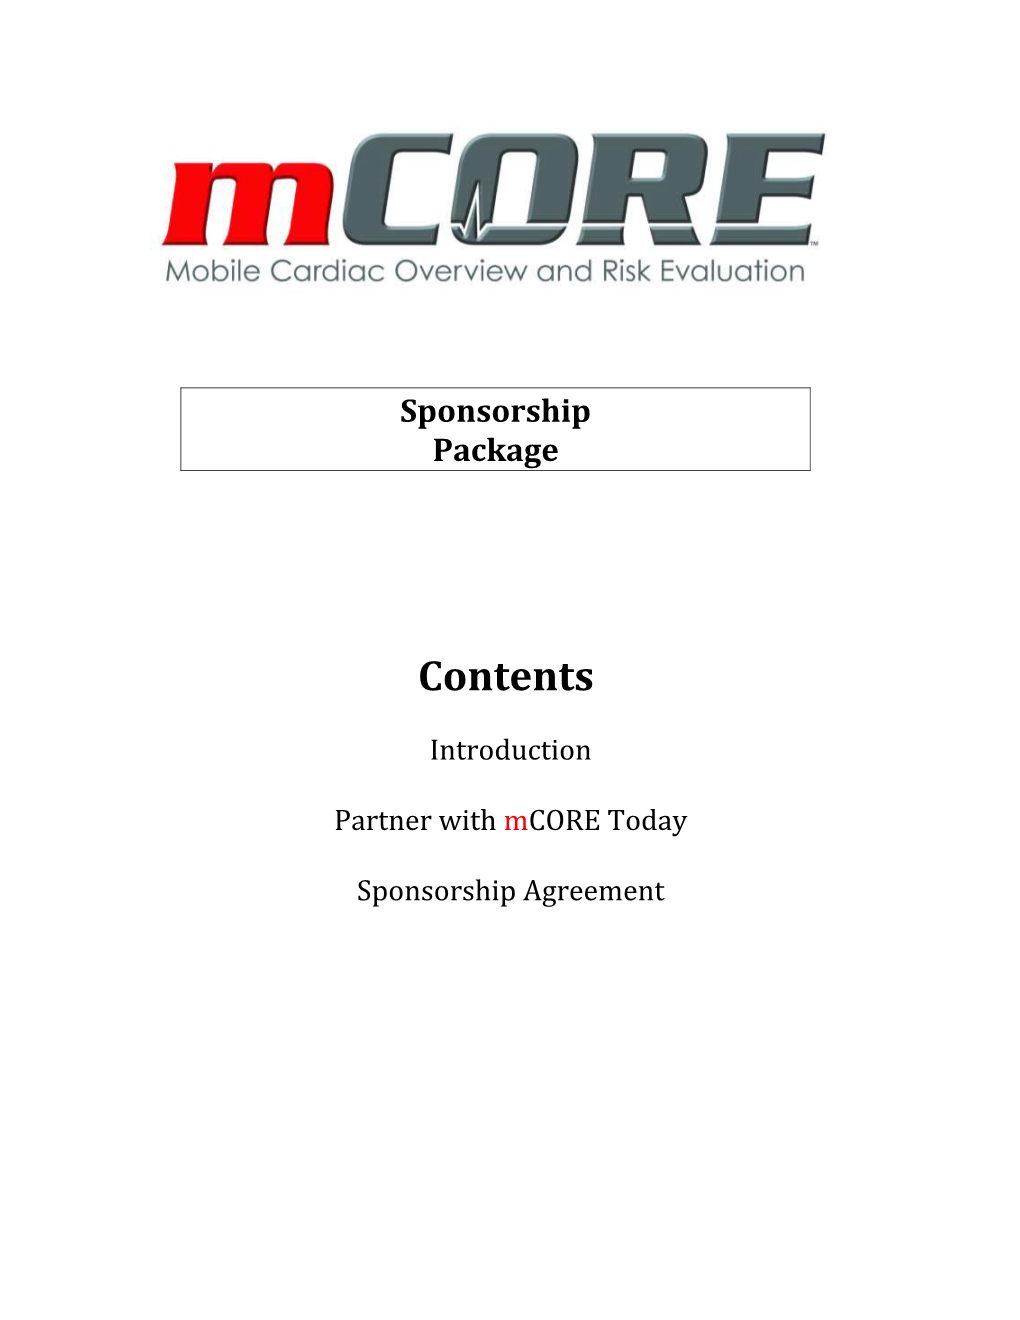 Partner with Mcore Today